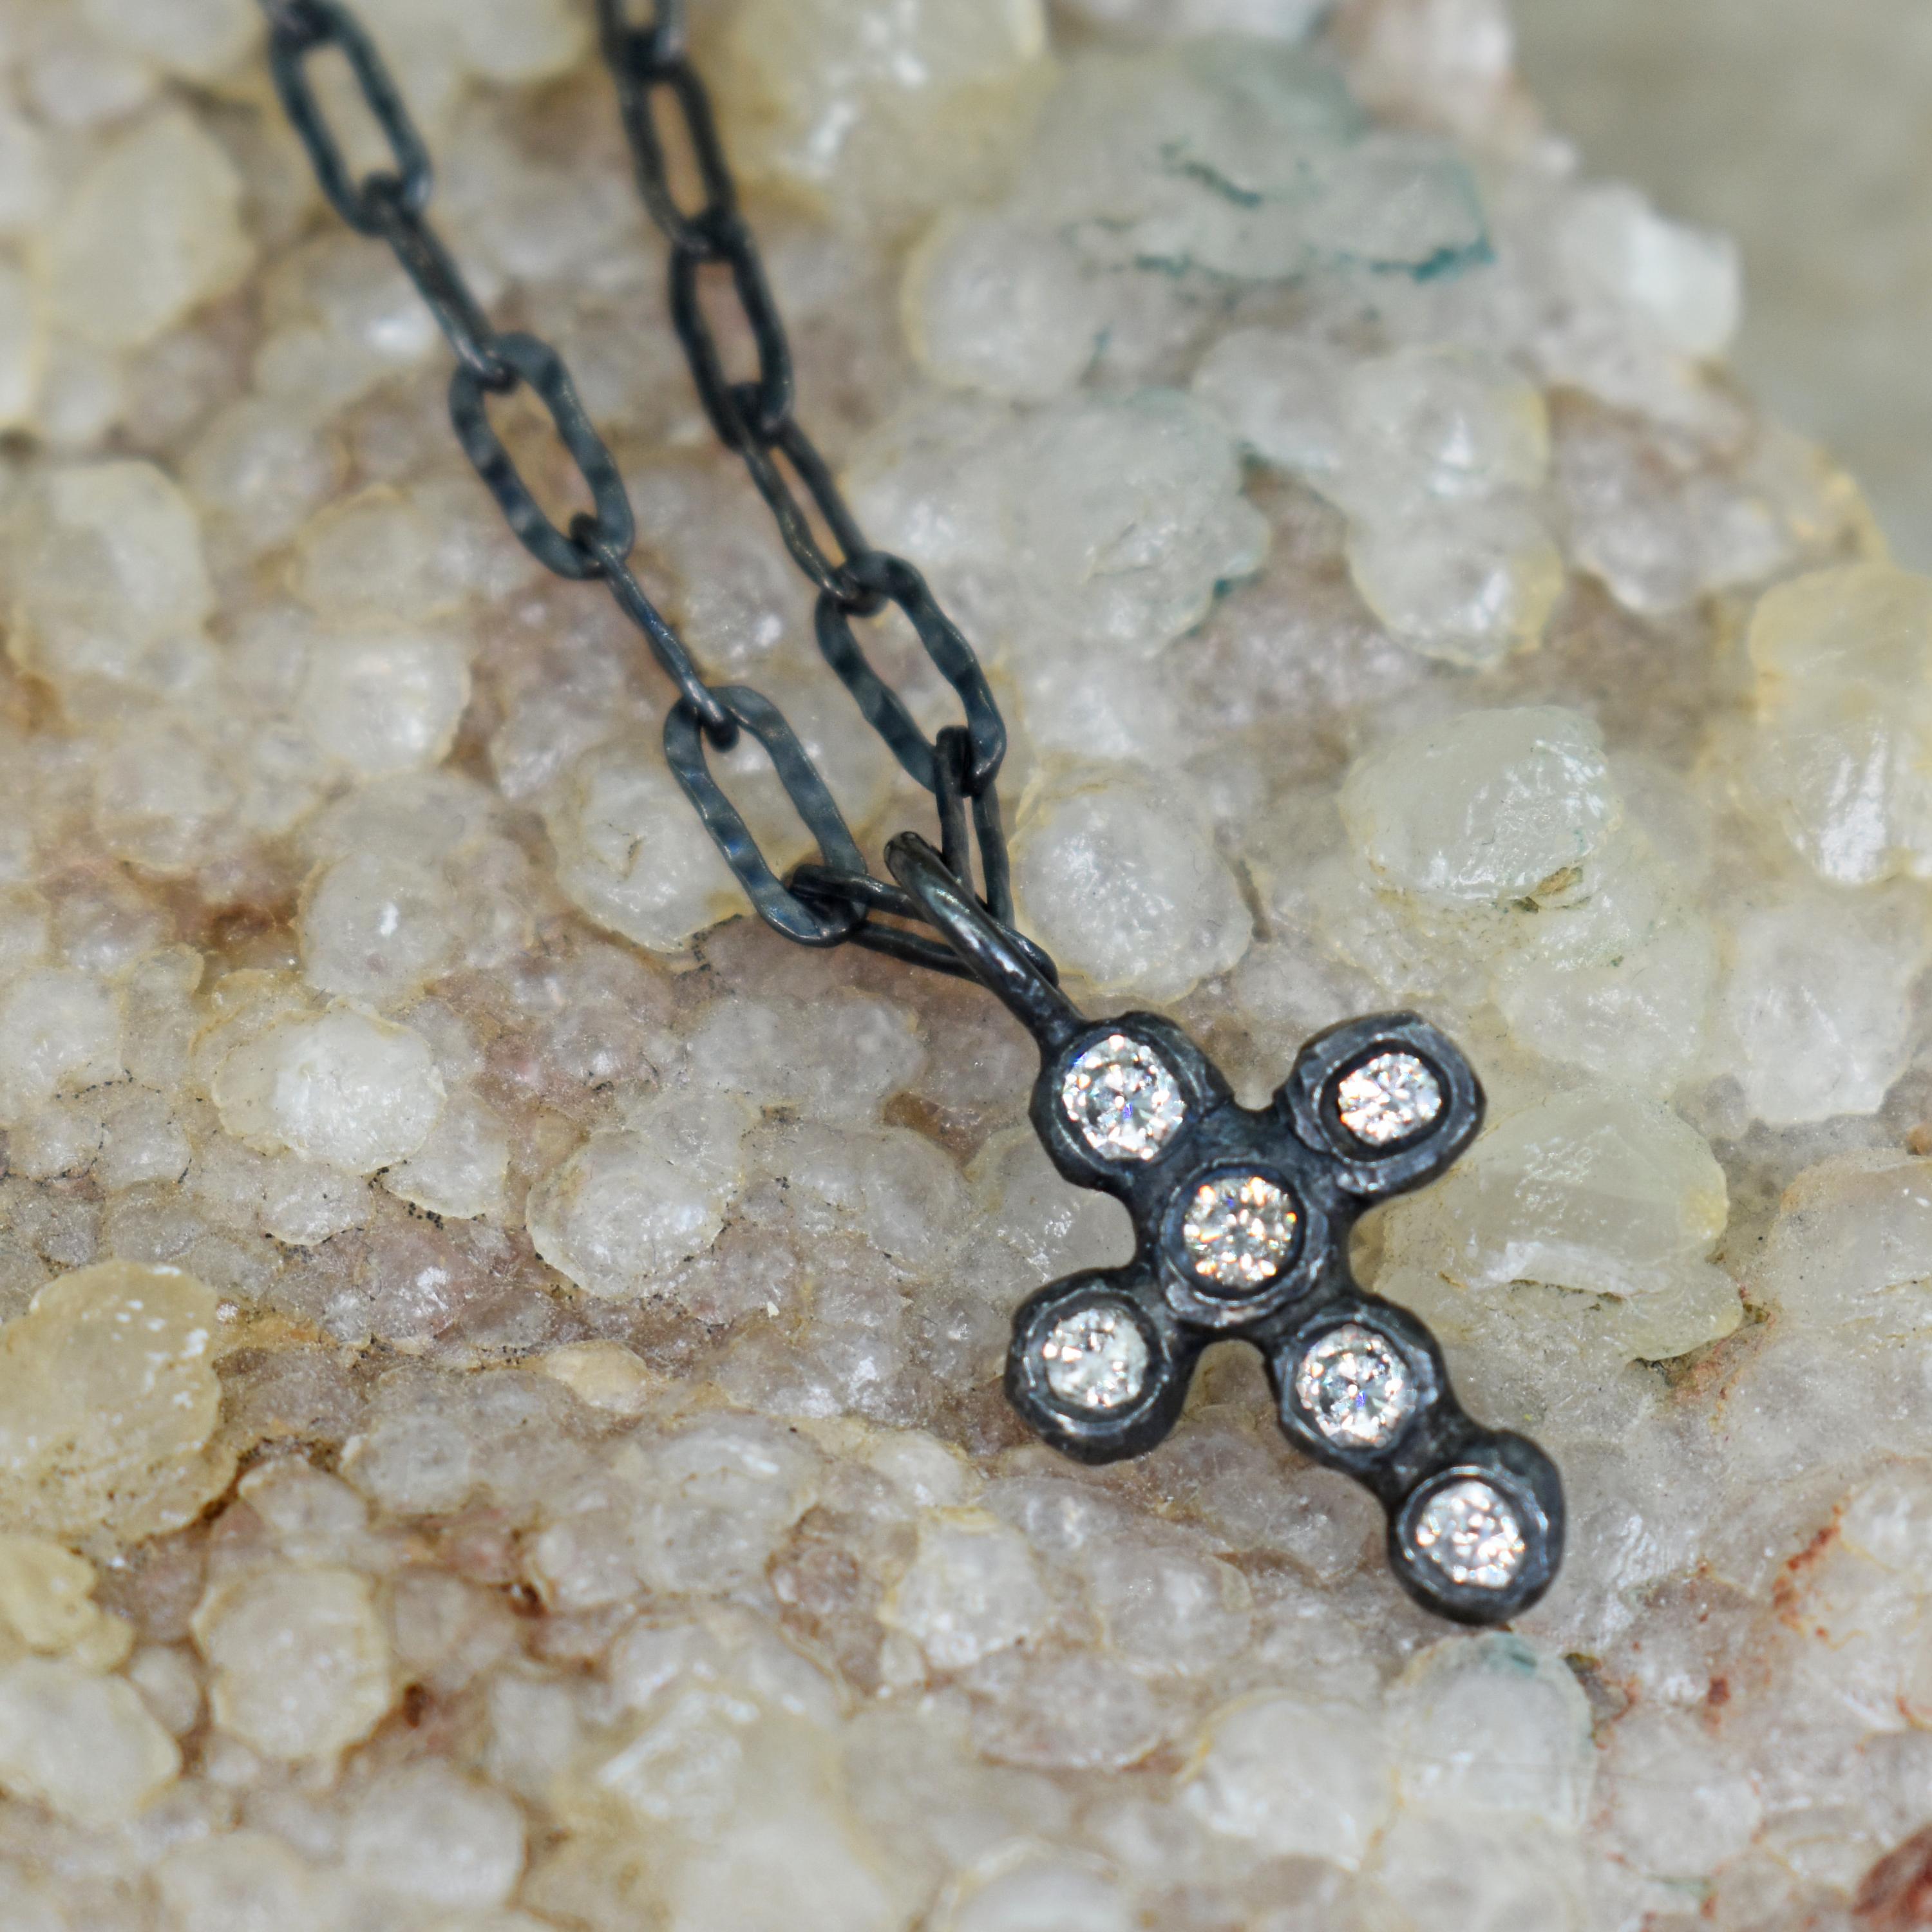 Round white Diamonds (0.24 total carat) set in an oxidized sterling silver cross pendant on a hammered, paperclip / elongated cable chain. Pendant is 0.88 inch in length, and chain is 16 inches in length.